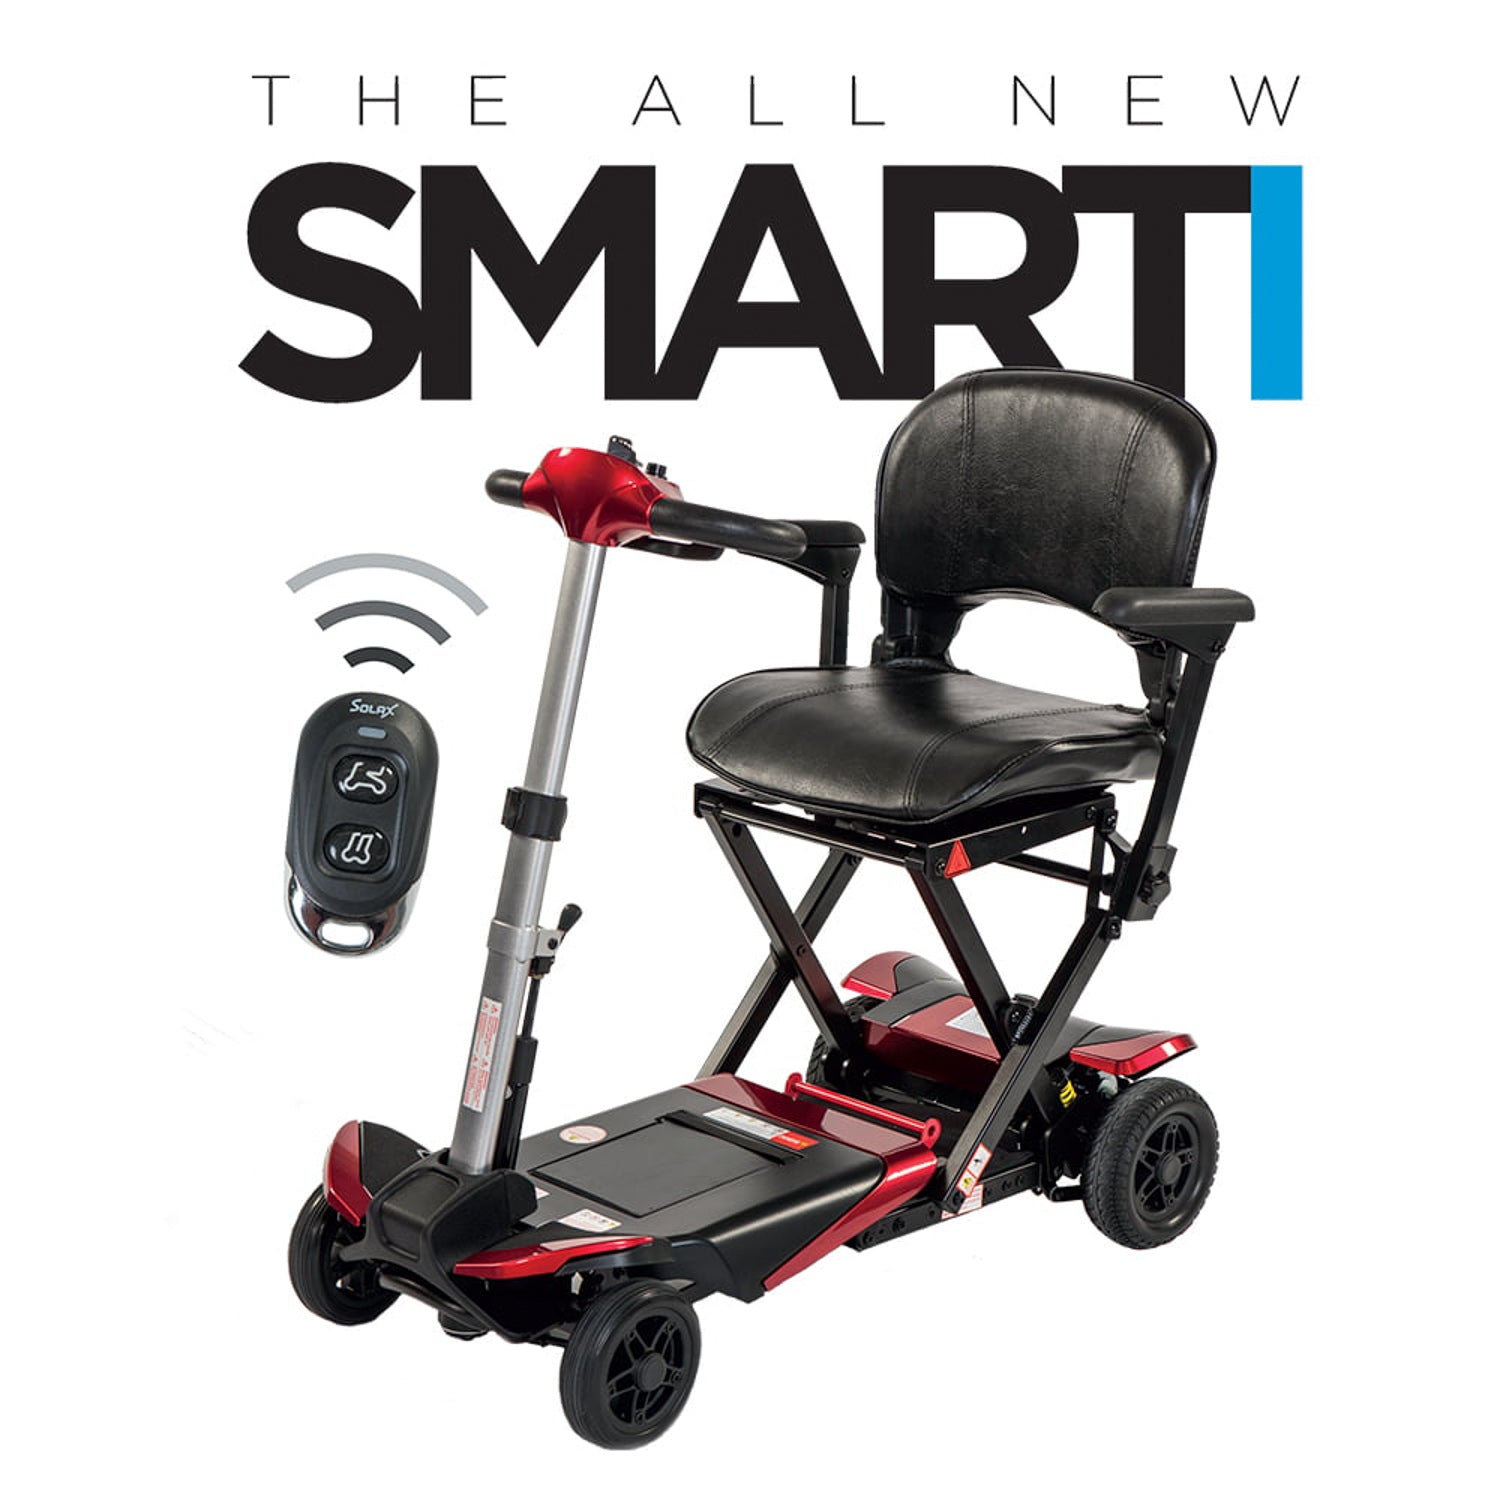 The ALL NEW SMARTI with Rear Suspension for Improved Comfort Remote Auto-Folding Travel Mobility Scooter